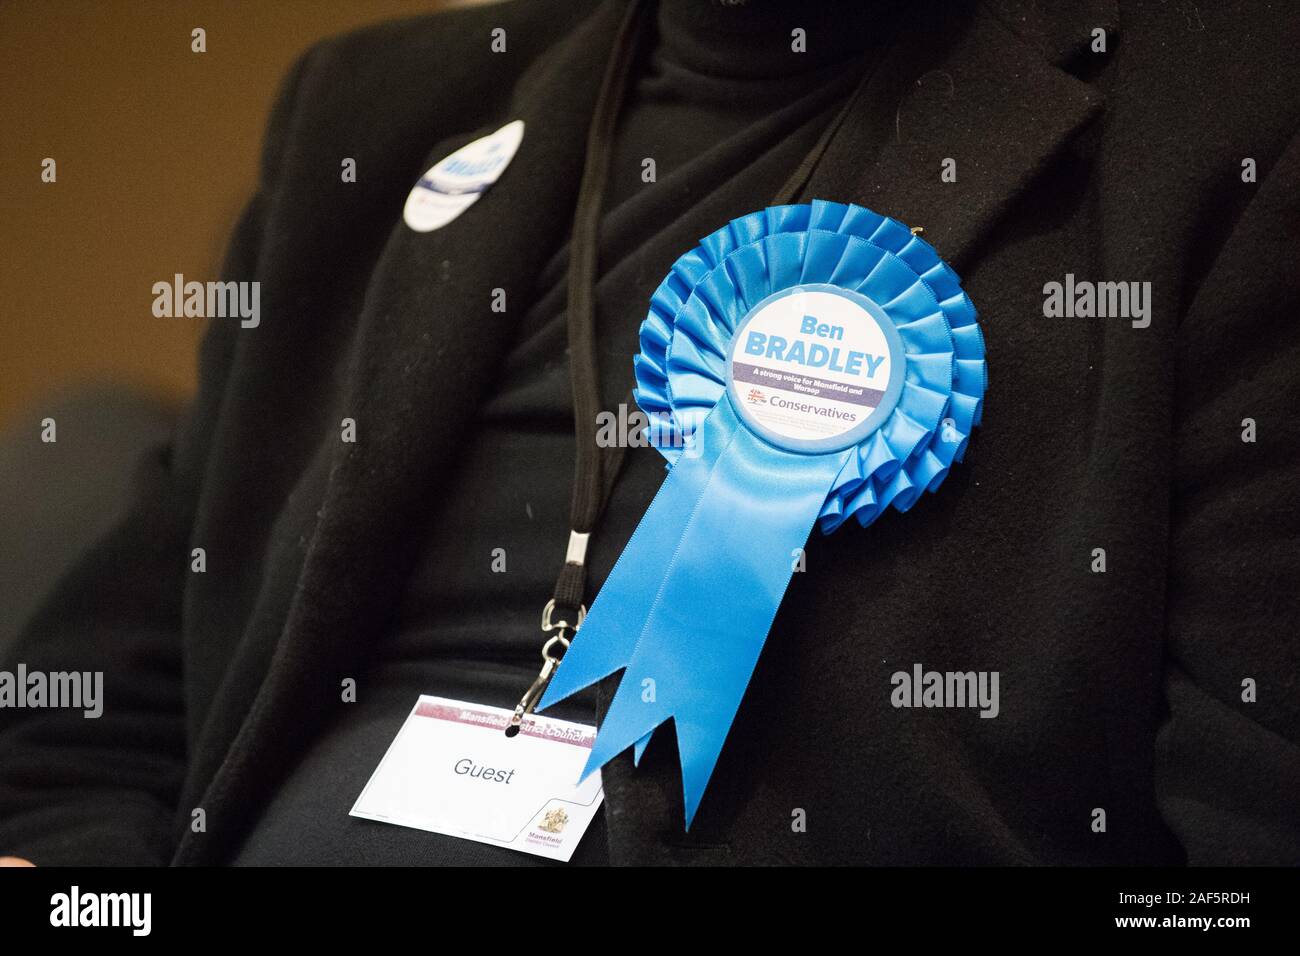 UK Elections, Mansfield, Nottinghamshire, England, UK. 13th. December, 2019. Ben Bradley retains this parliamentary seat for the Conservative Party with an increased majority over his nearest rival the Labour Party candidate Sonya Ward. This Parliamentary seat which was won from the Labour Party in the 2017 General Election had become a key battle ground between the two main parties in this election. Credit: Alan Beastall/Alamy live News Stock Photo